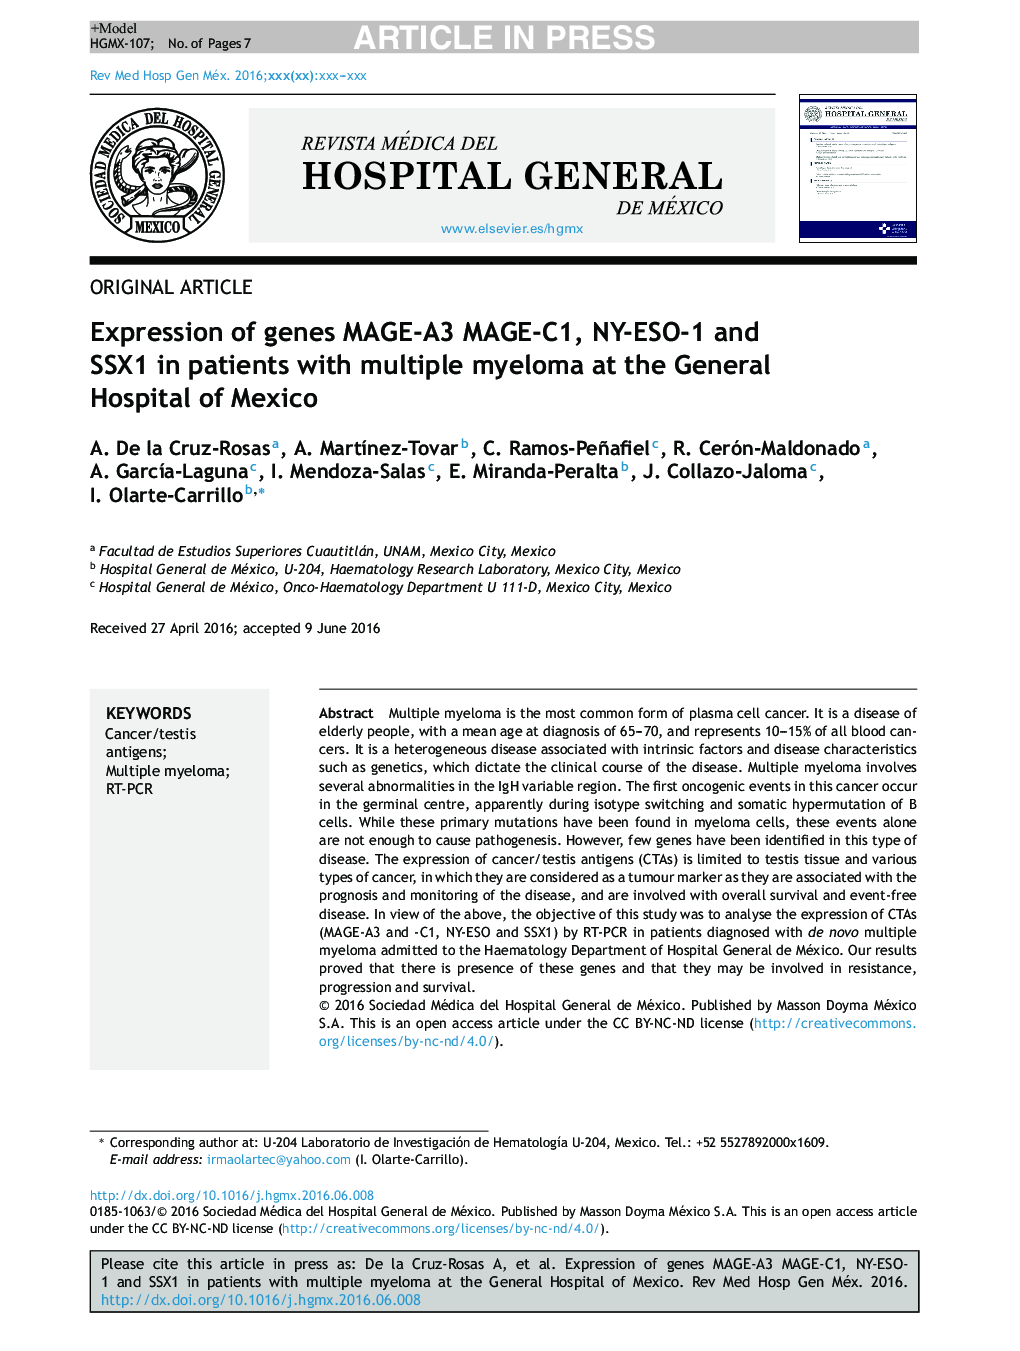 Expression of genes MAGE-A3 MAGE-C1, NY-ESO-1 and SSX1 in patients with multiple myeloma at the General Hospital of Mexico